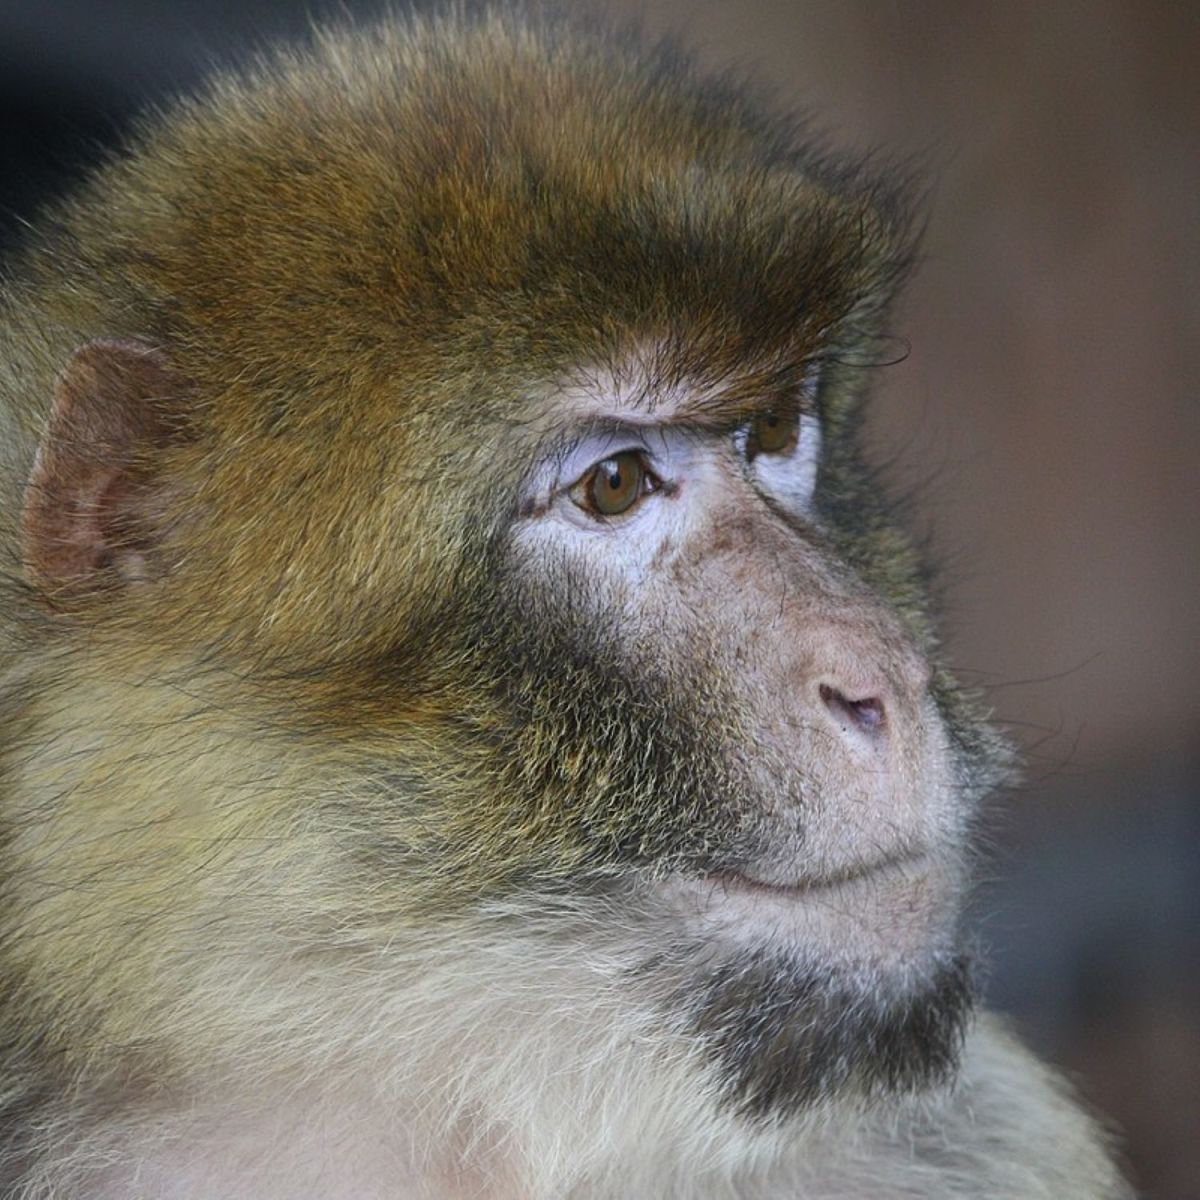 A Barbary Macaque monkey is a formidable foe.